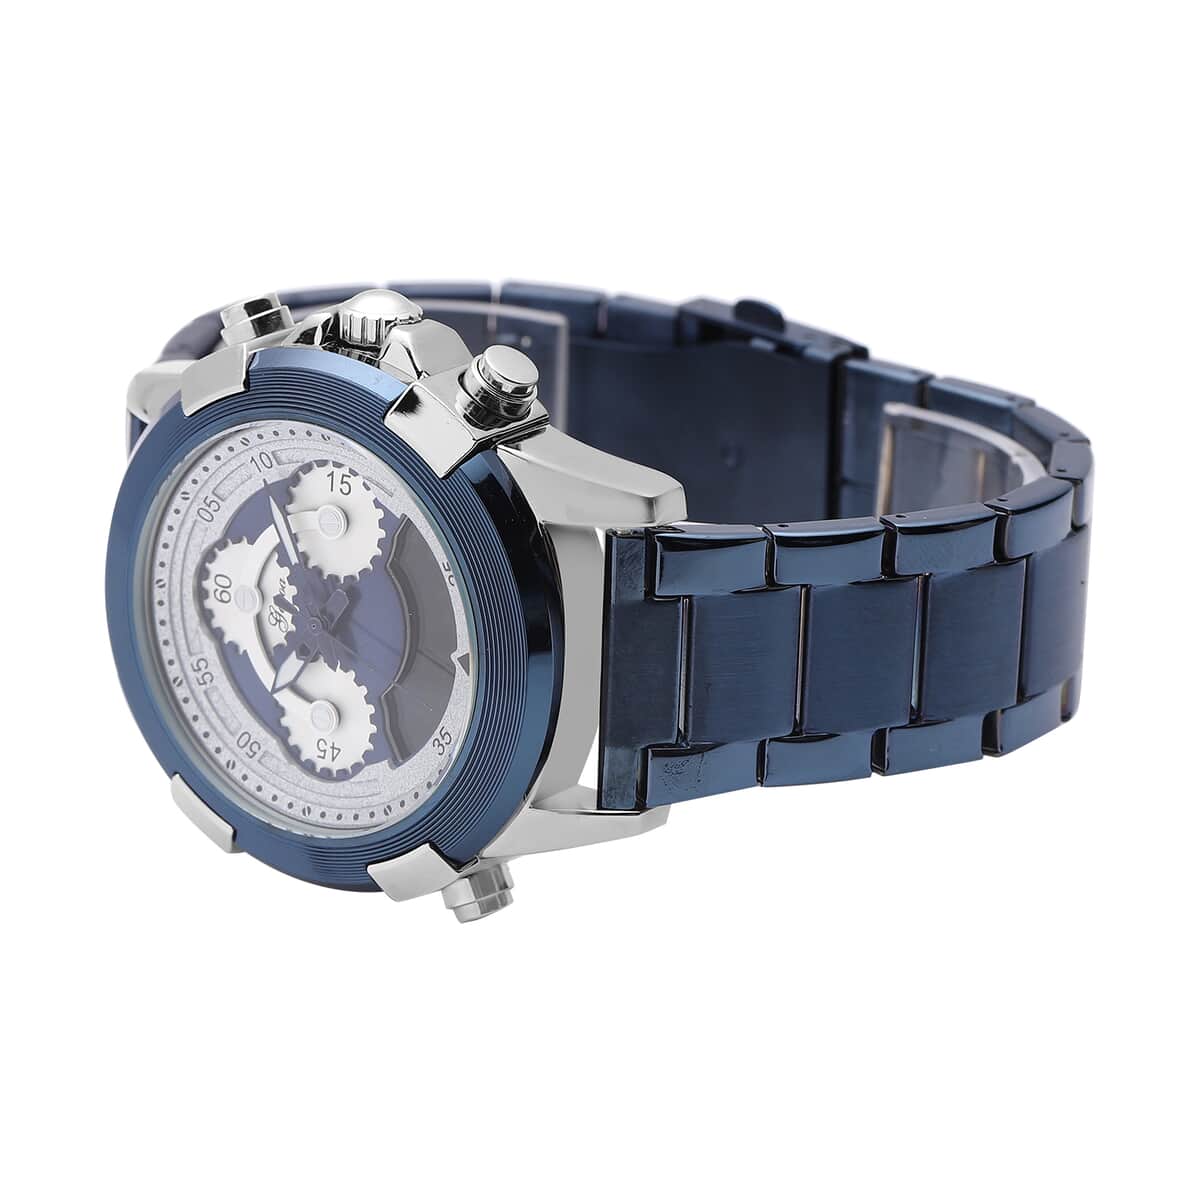 Genoa Japanese and Electronic Movement Multi Functional Watch in ION Plated Blue Stainless Steel Strap image number 4